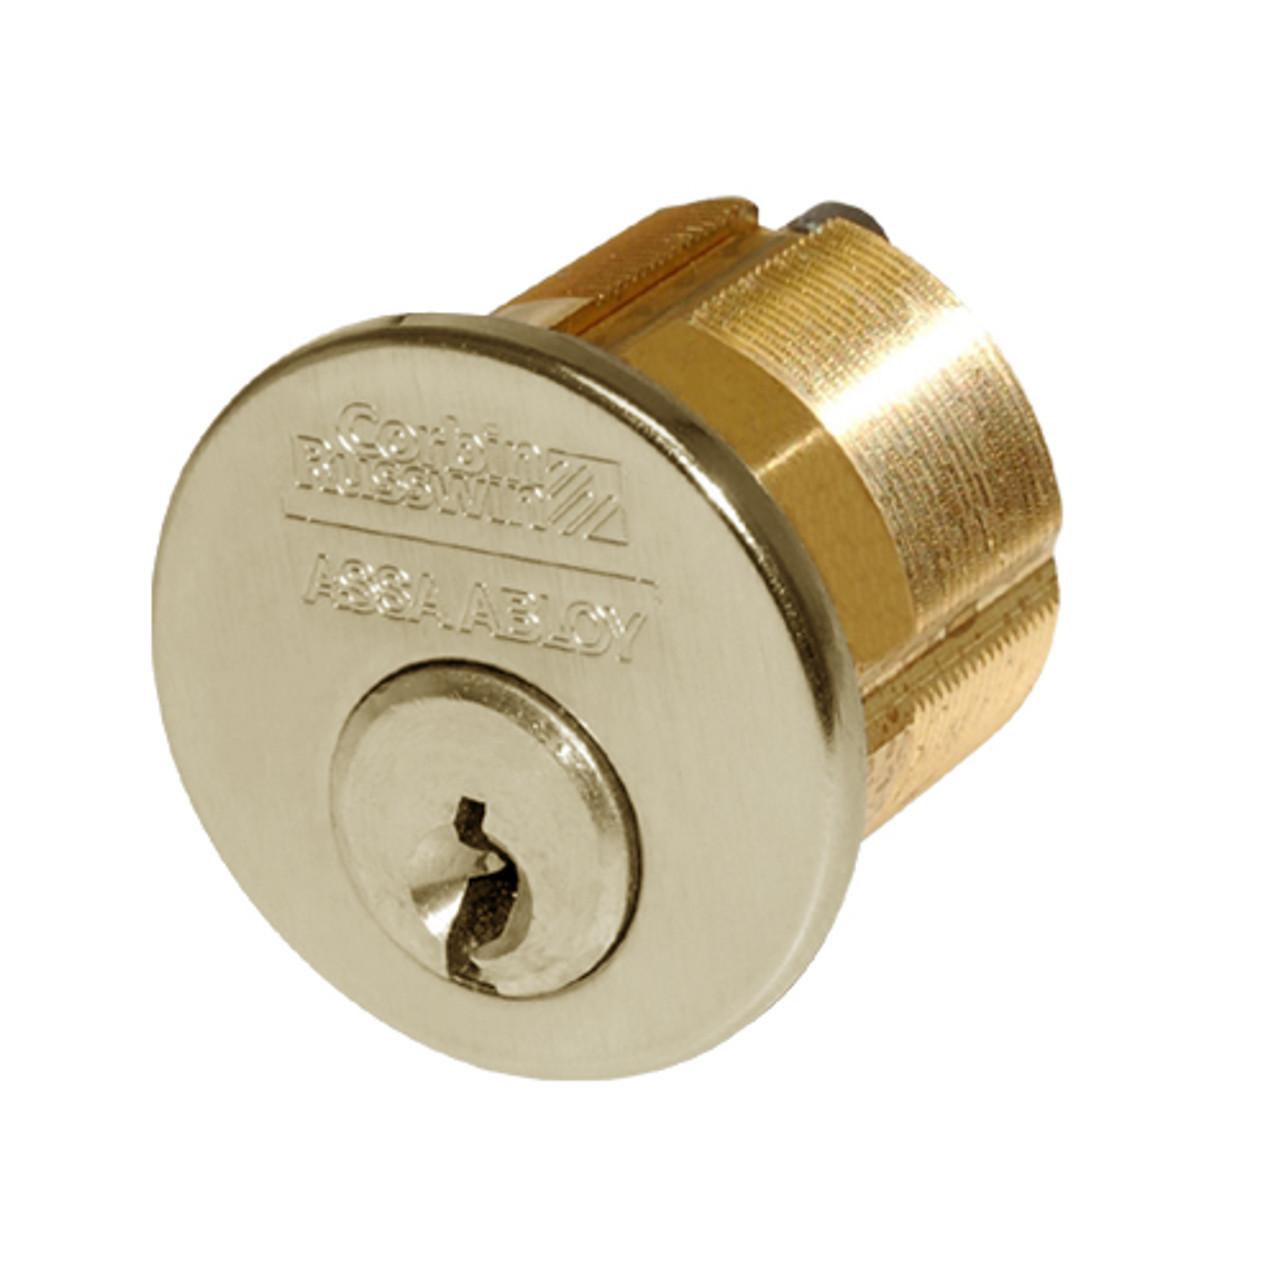 CR1000-138-A02-6-L4-606 Corbin Conventional Mortise Cylinder for Mortise Lock and DL3000 Deadlocks with Straight Cam in Satin Brass Finish